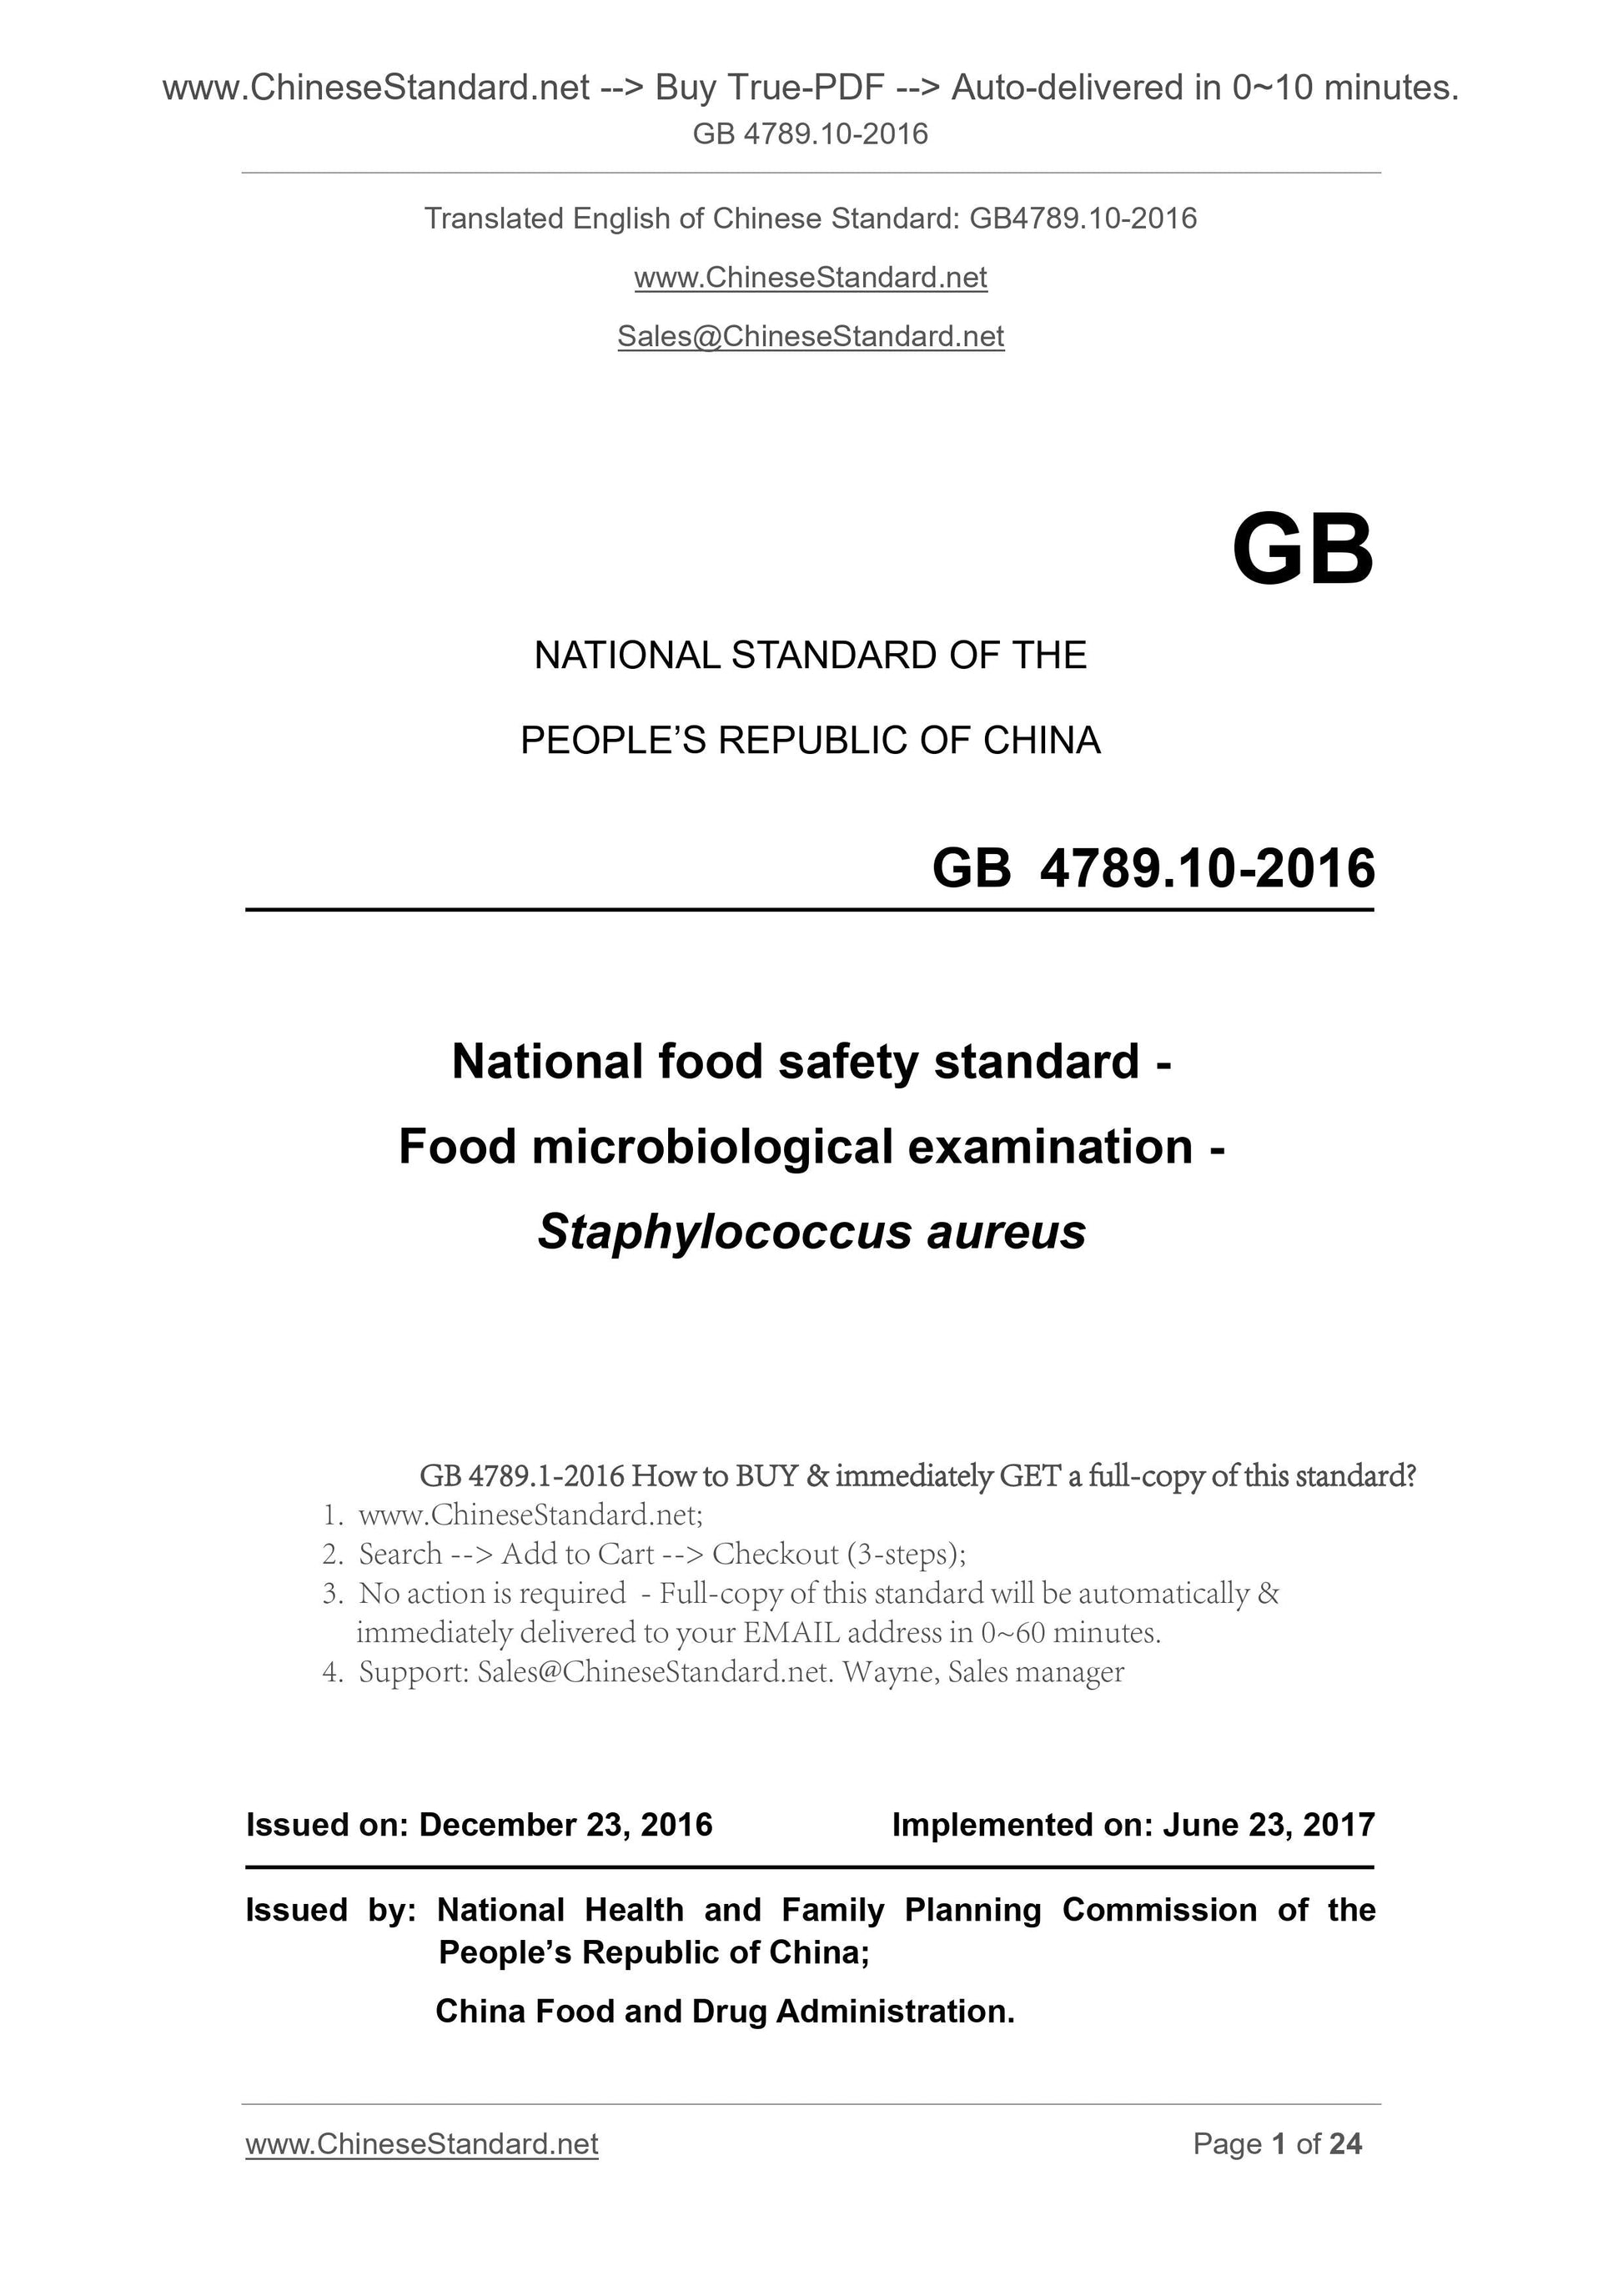 GB 4789.10-2016 Page 1